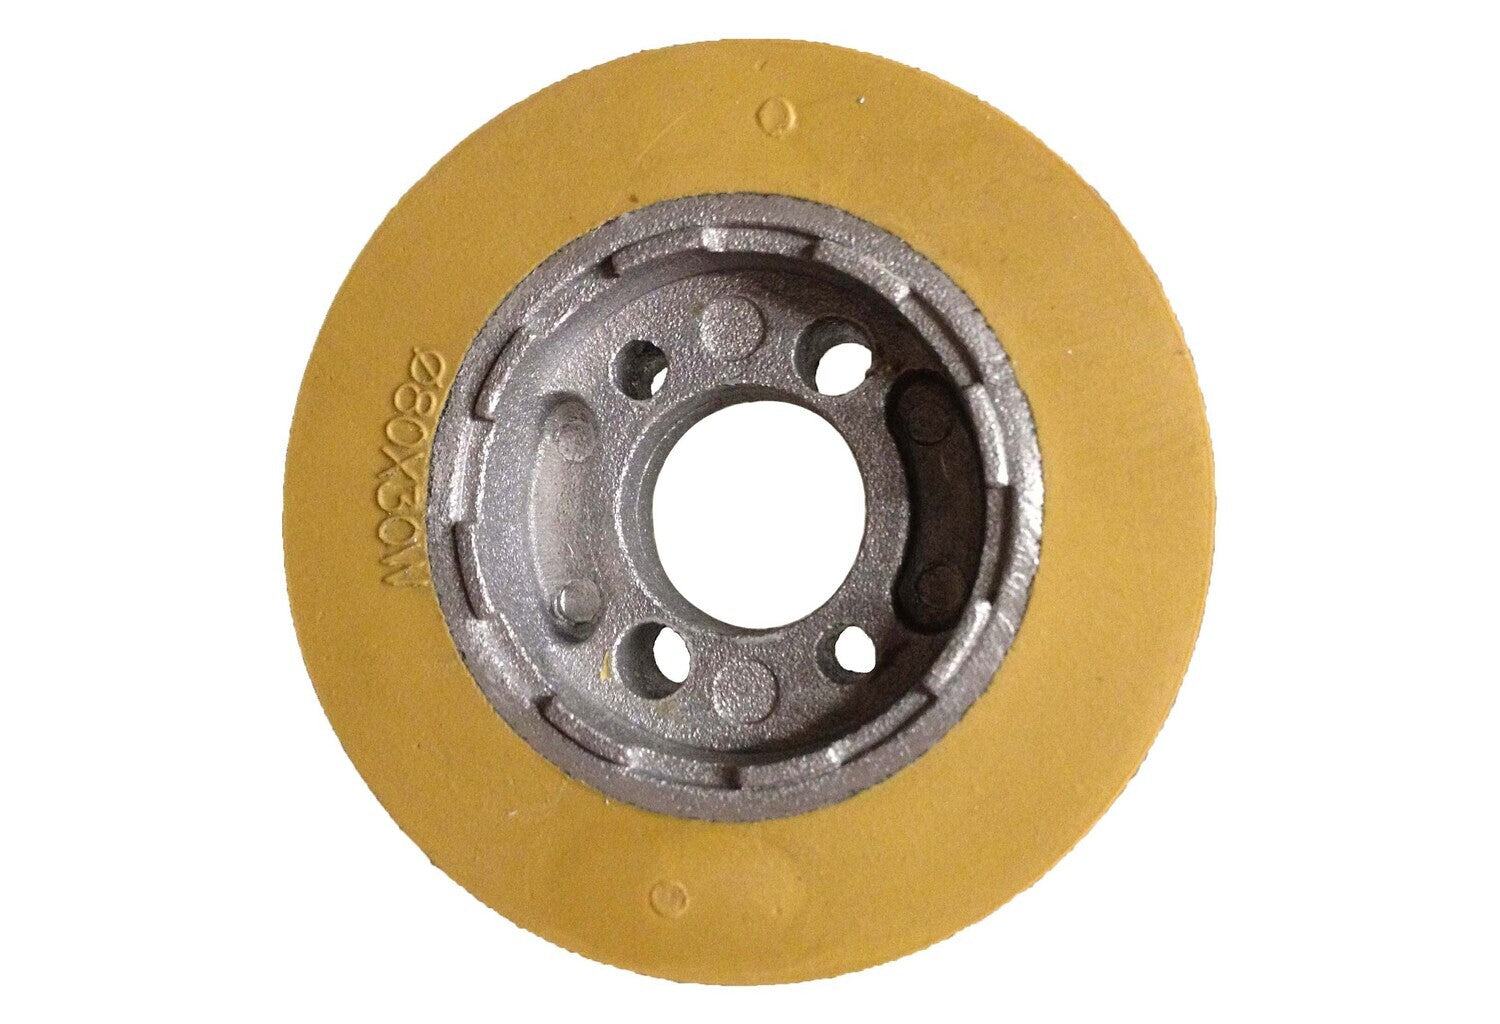 80mm Dia. x 30mm Roller Wheels to suit Power Feeders *Coming Soon*